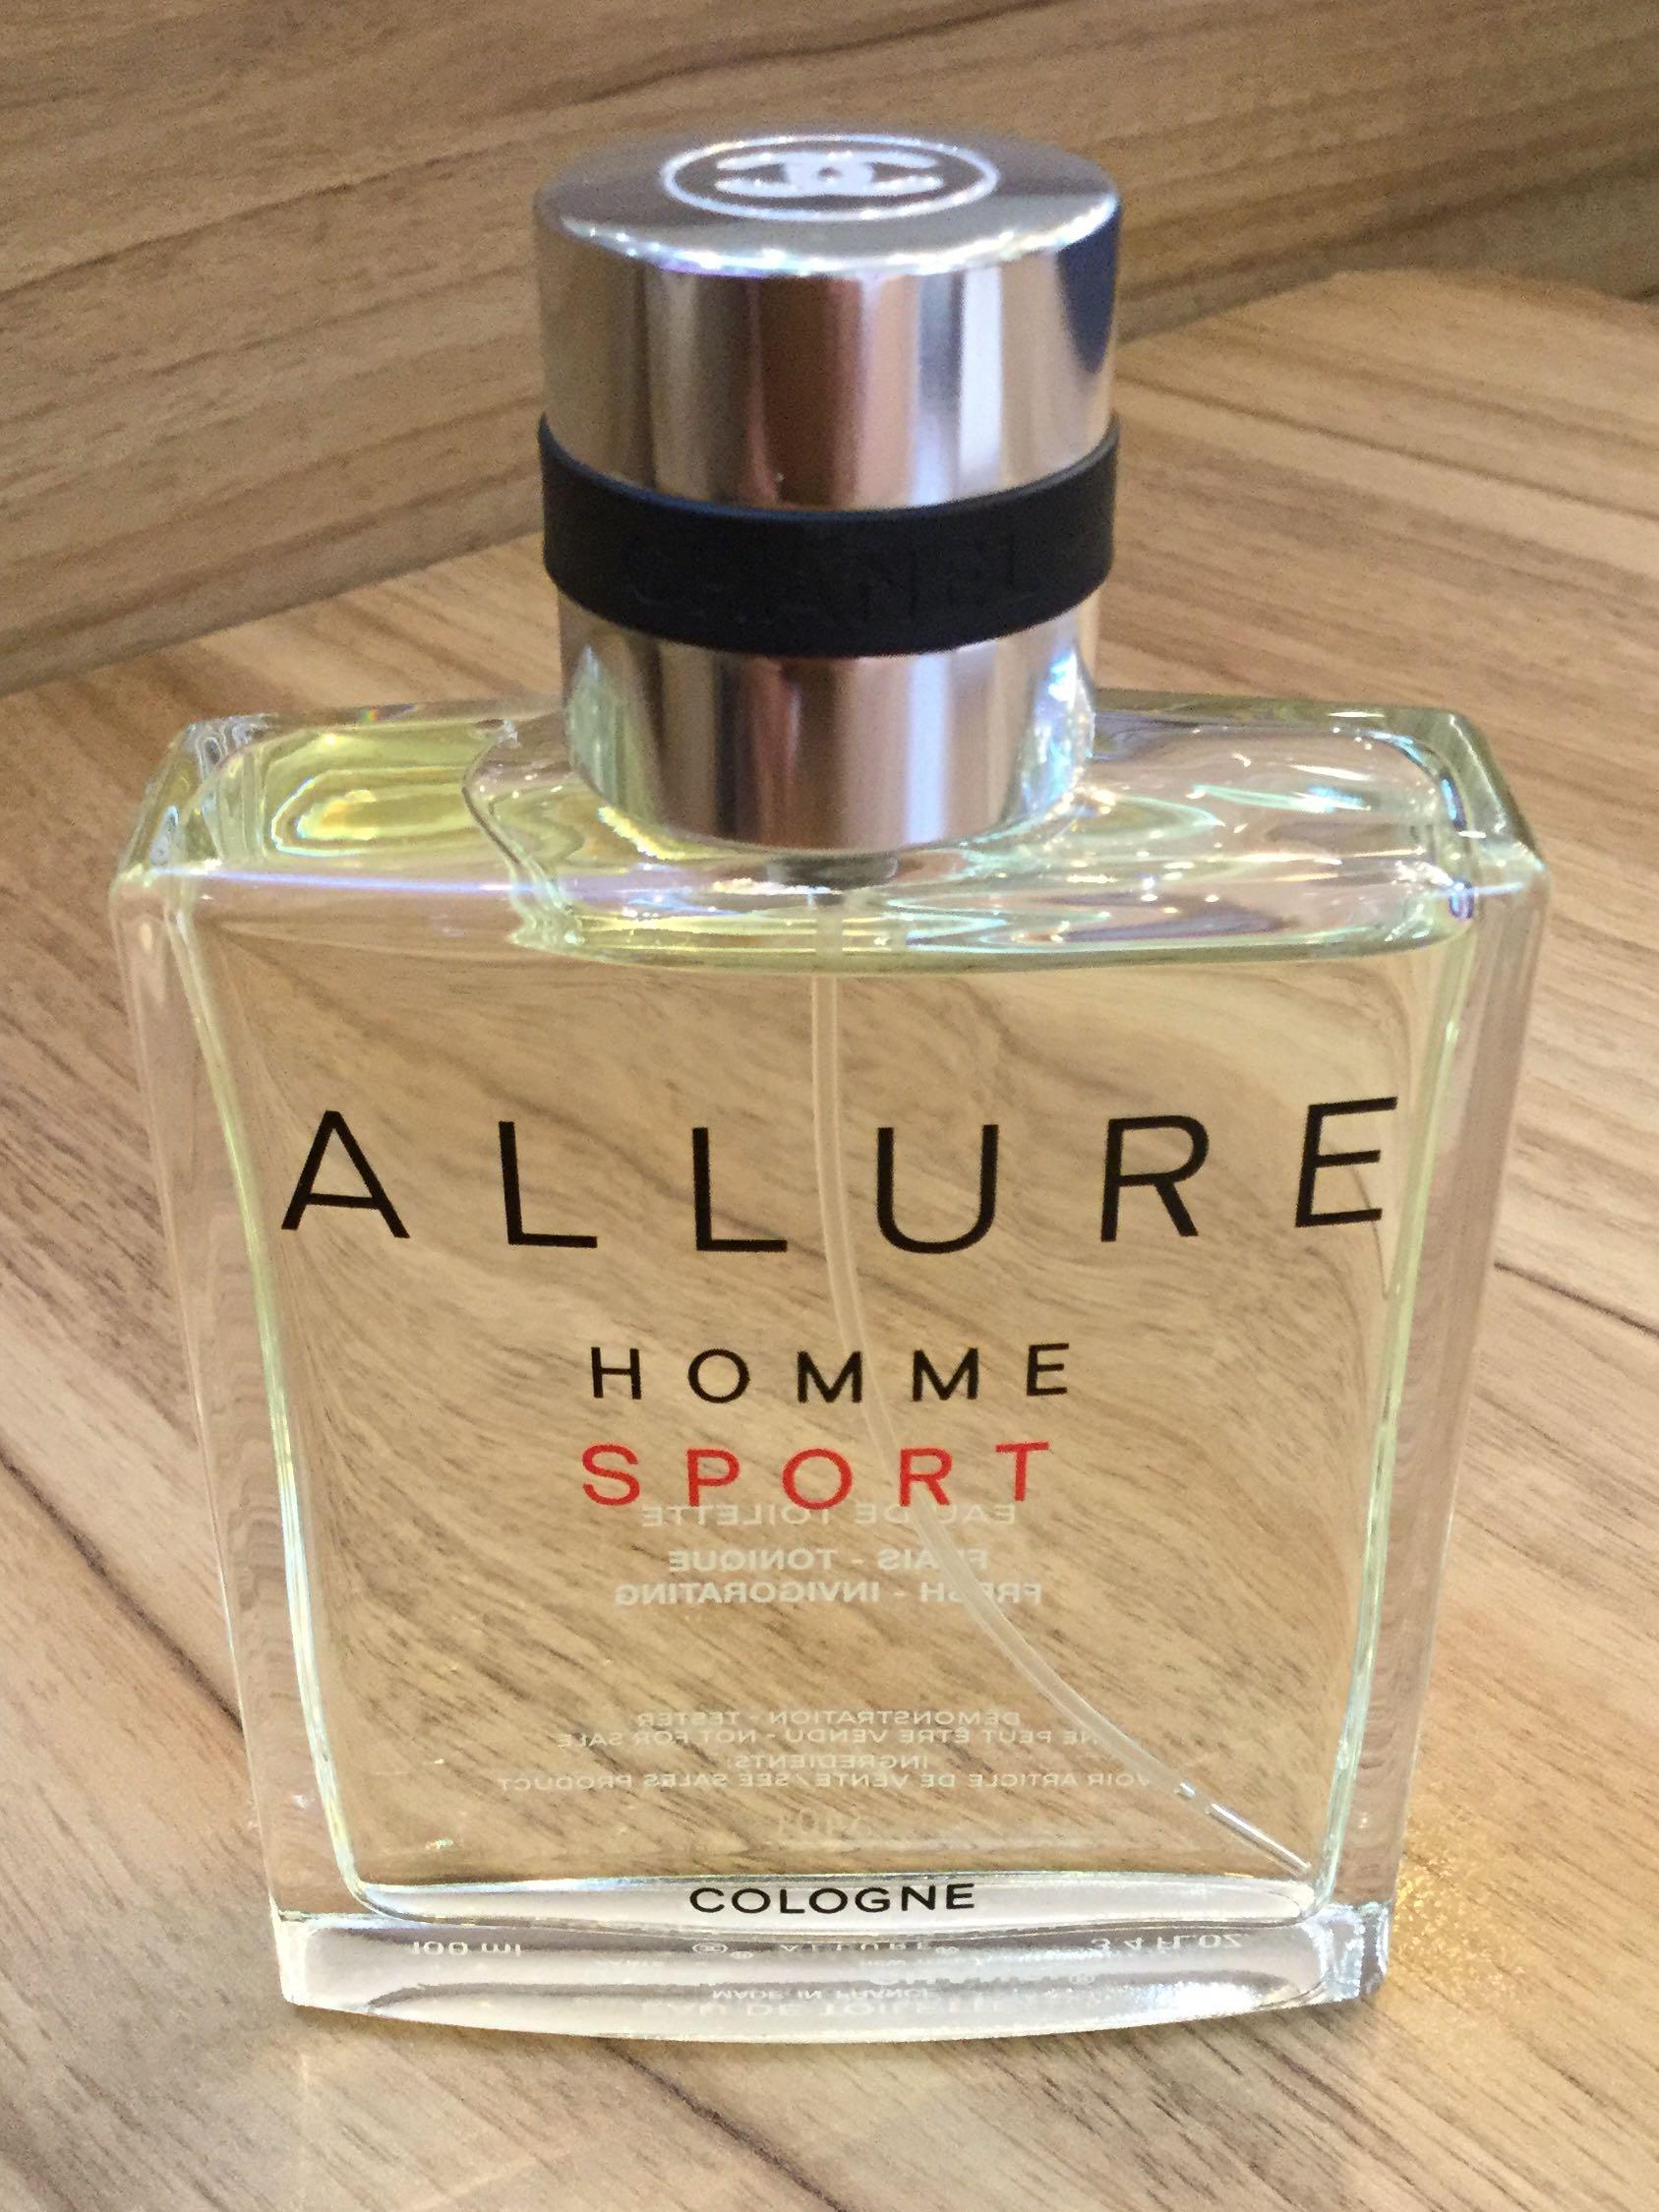 Chanel Allure Homme Sport Cologne (reserv)